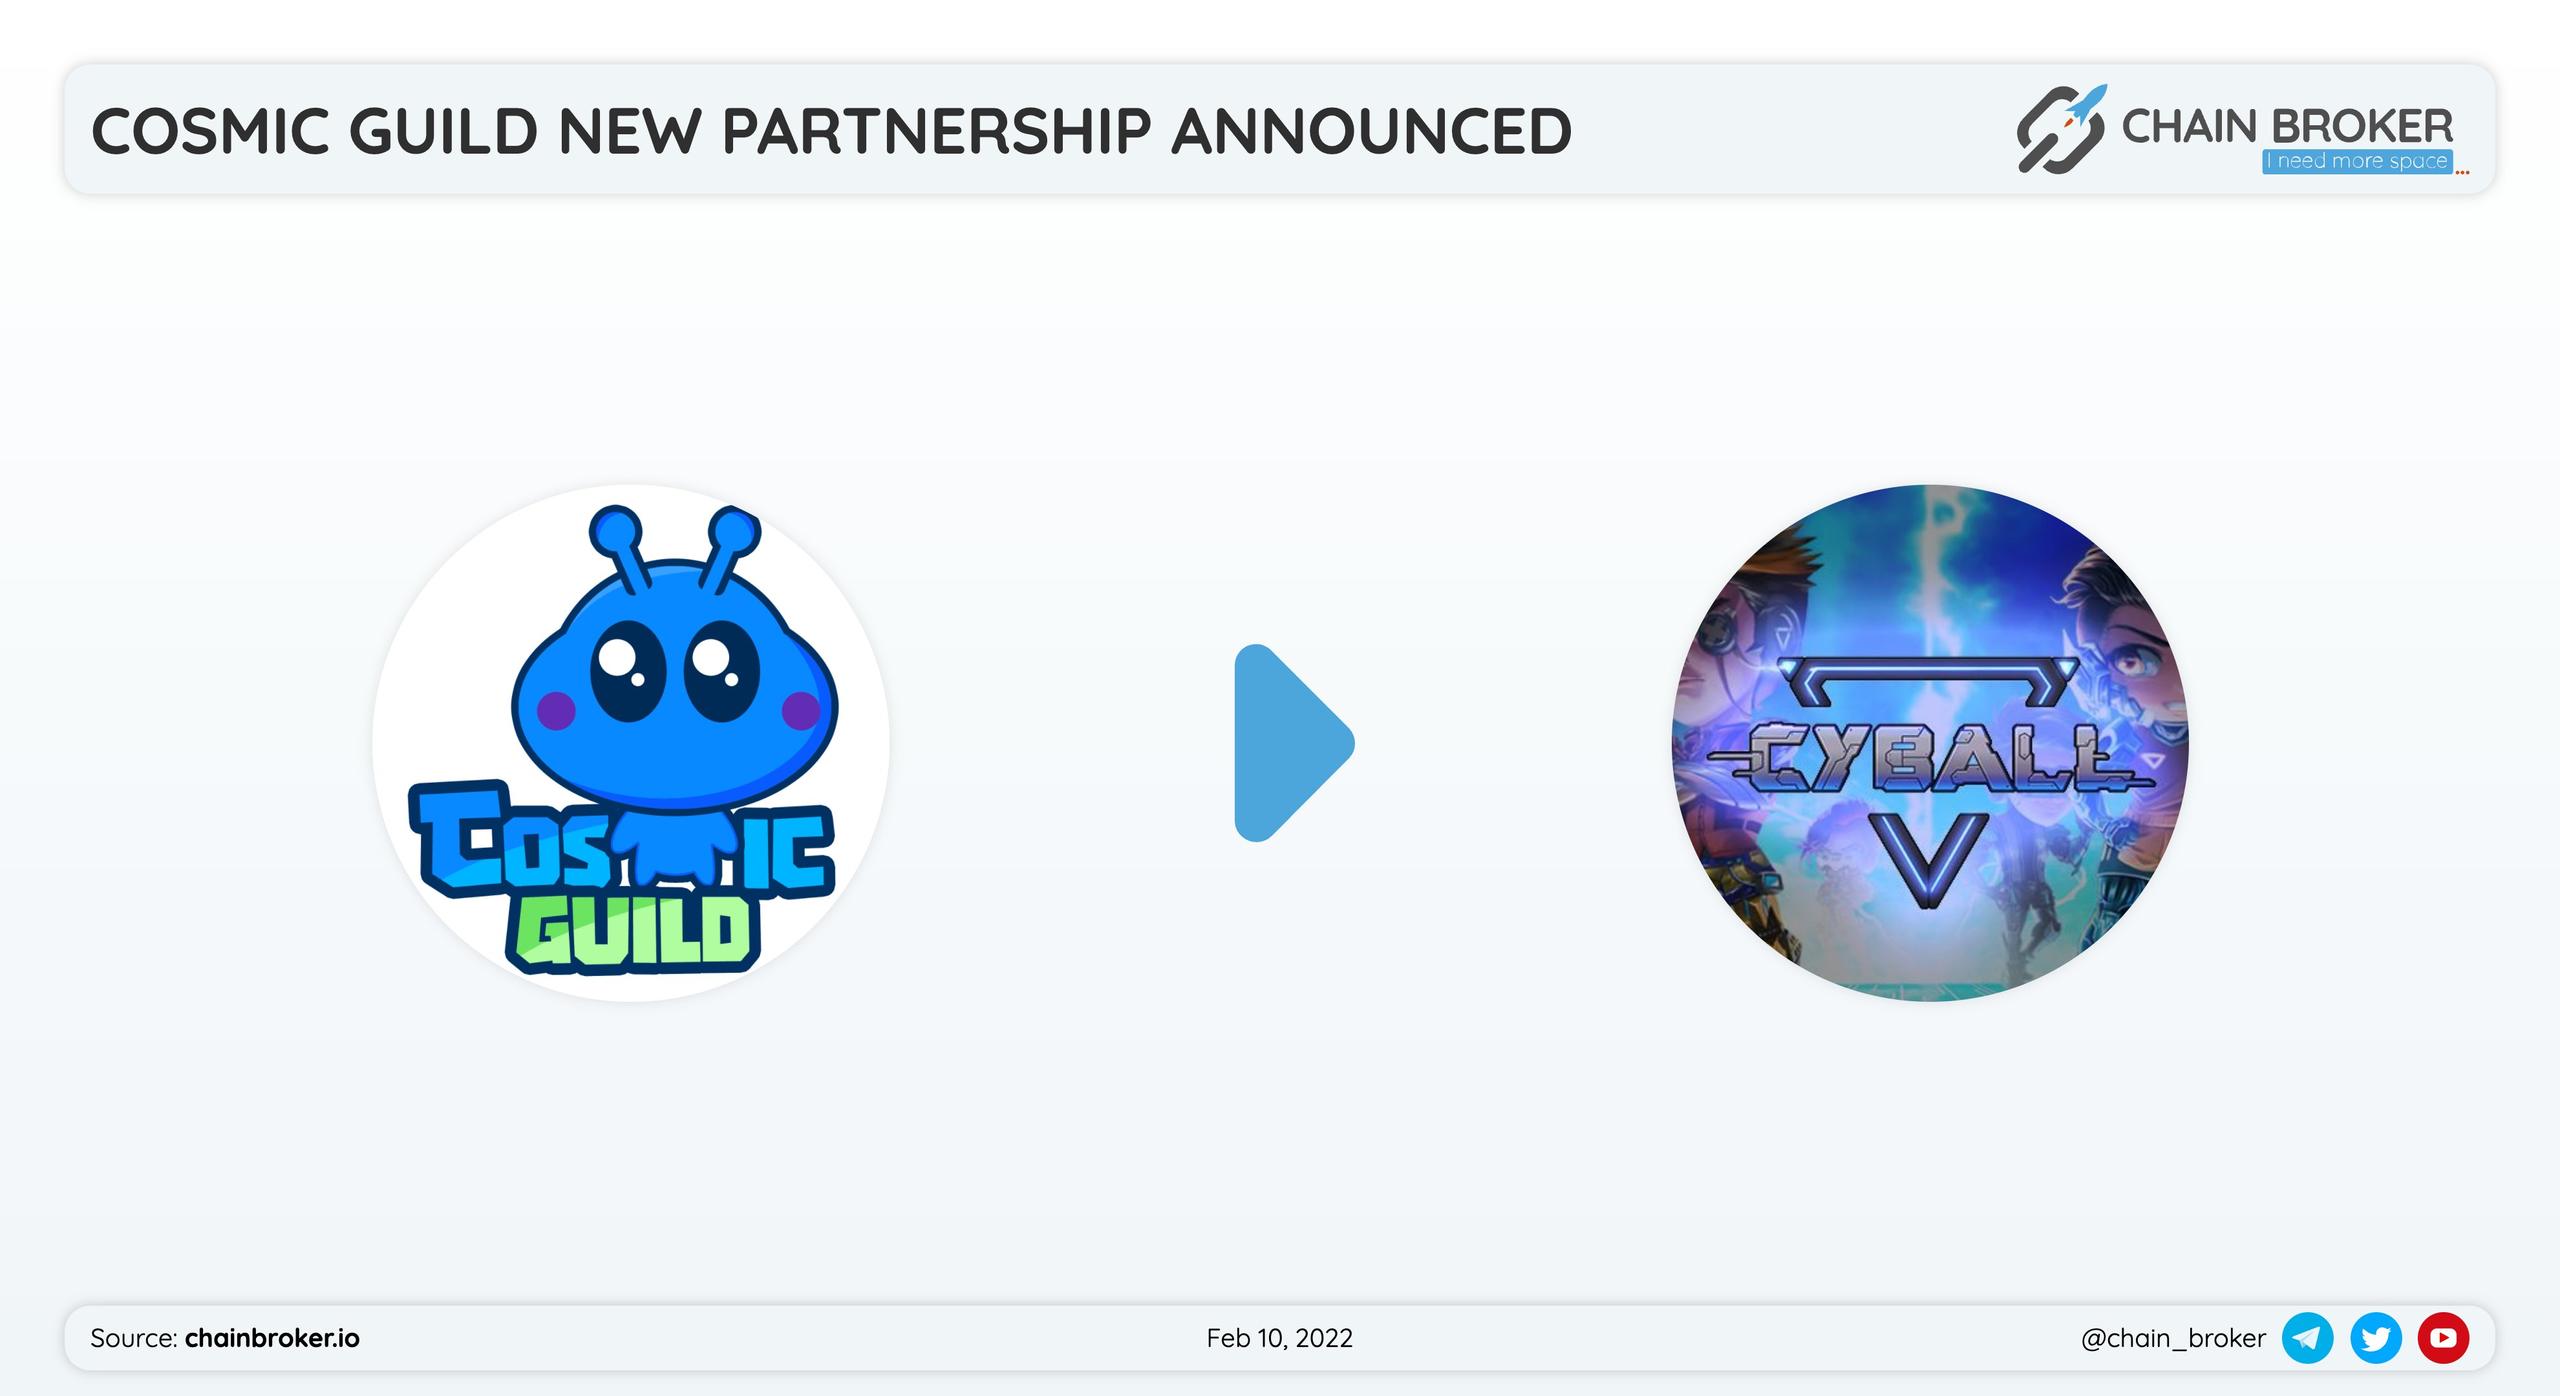 Cosmic Guild has partnered with CyBall to engage the guild into a new exciting journey.